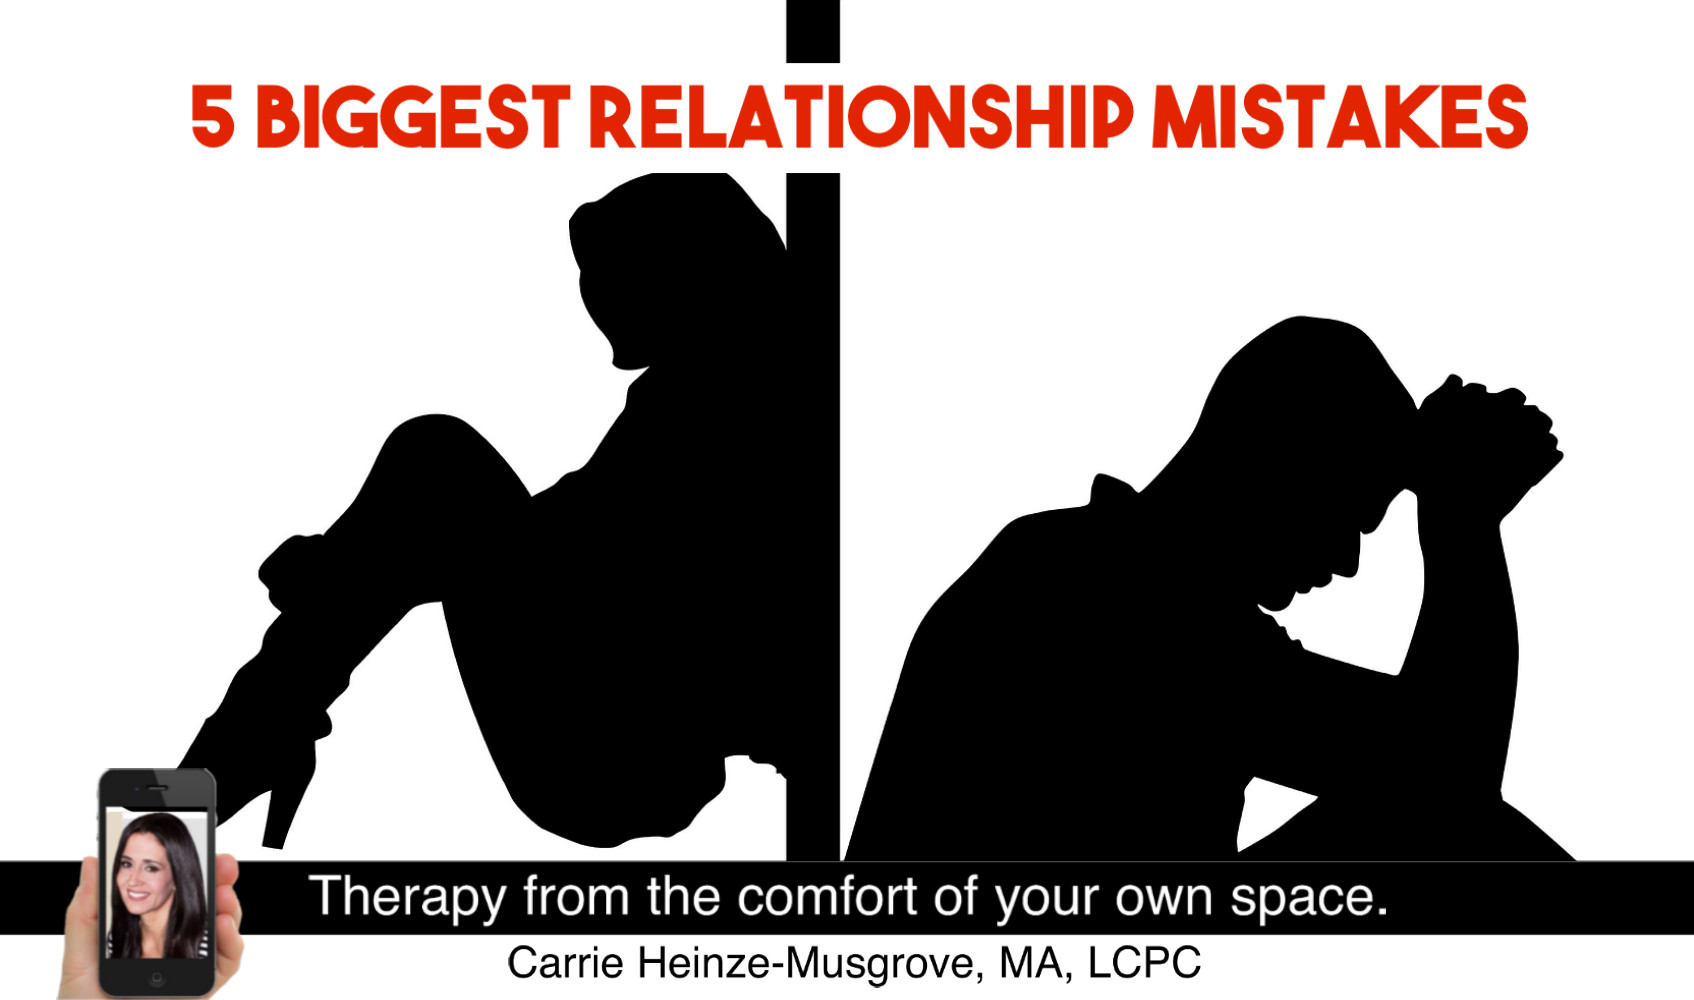 5 Relationship Mistakes.